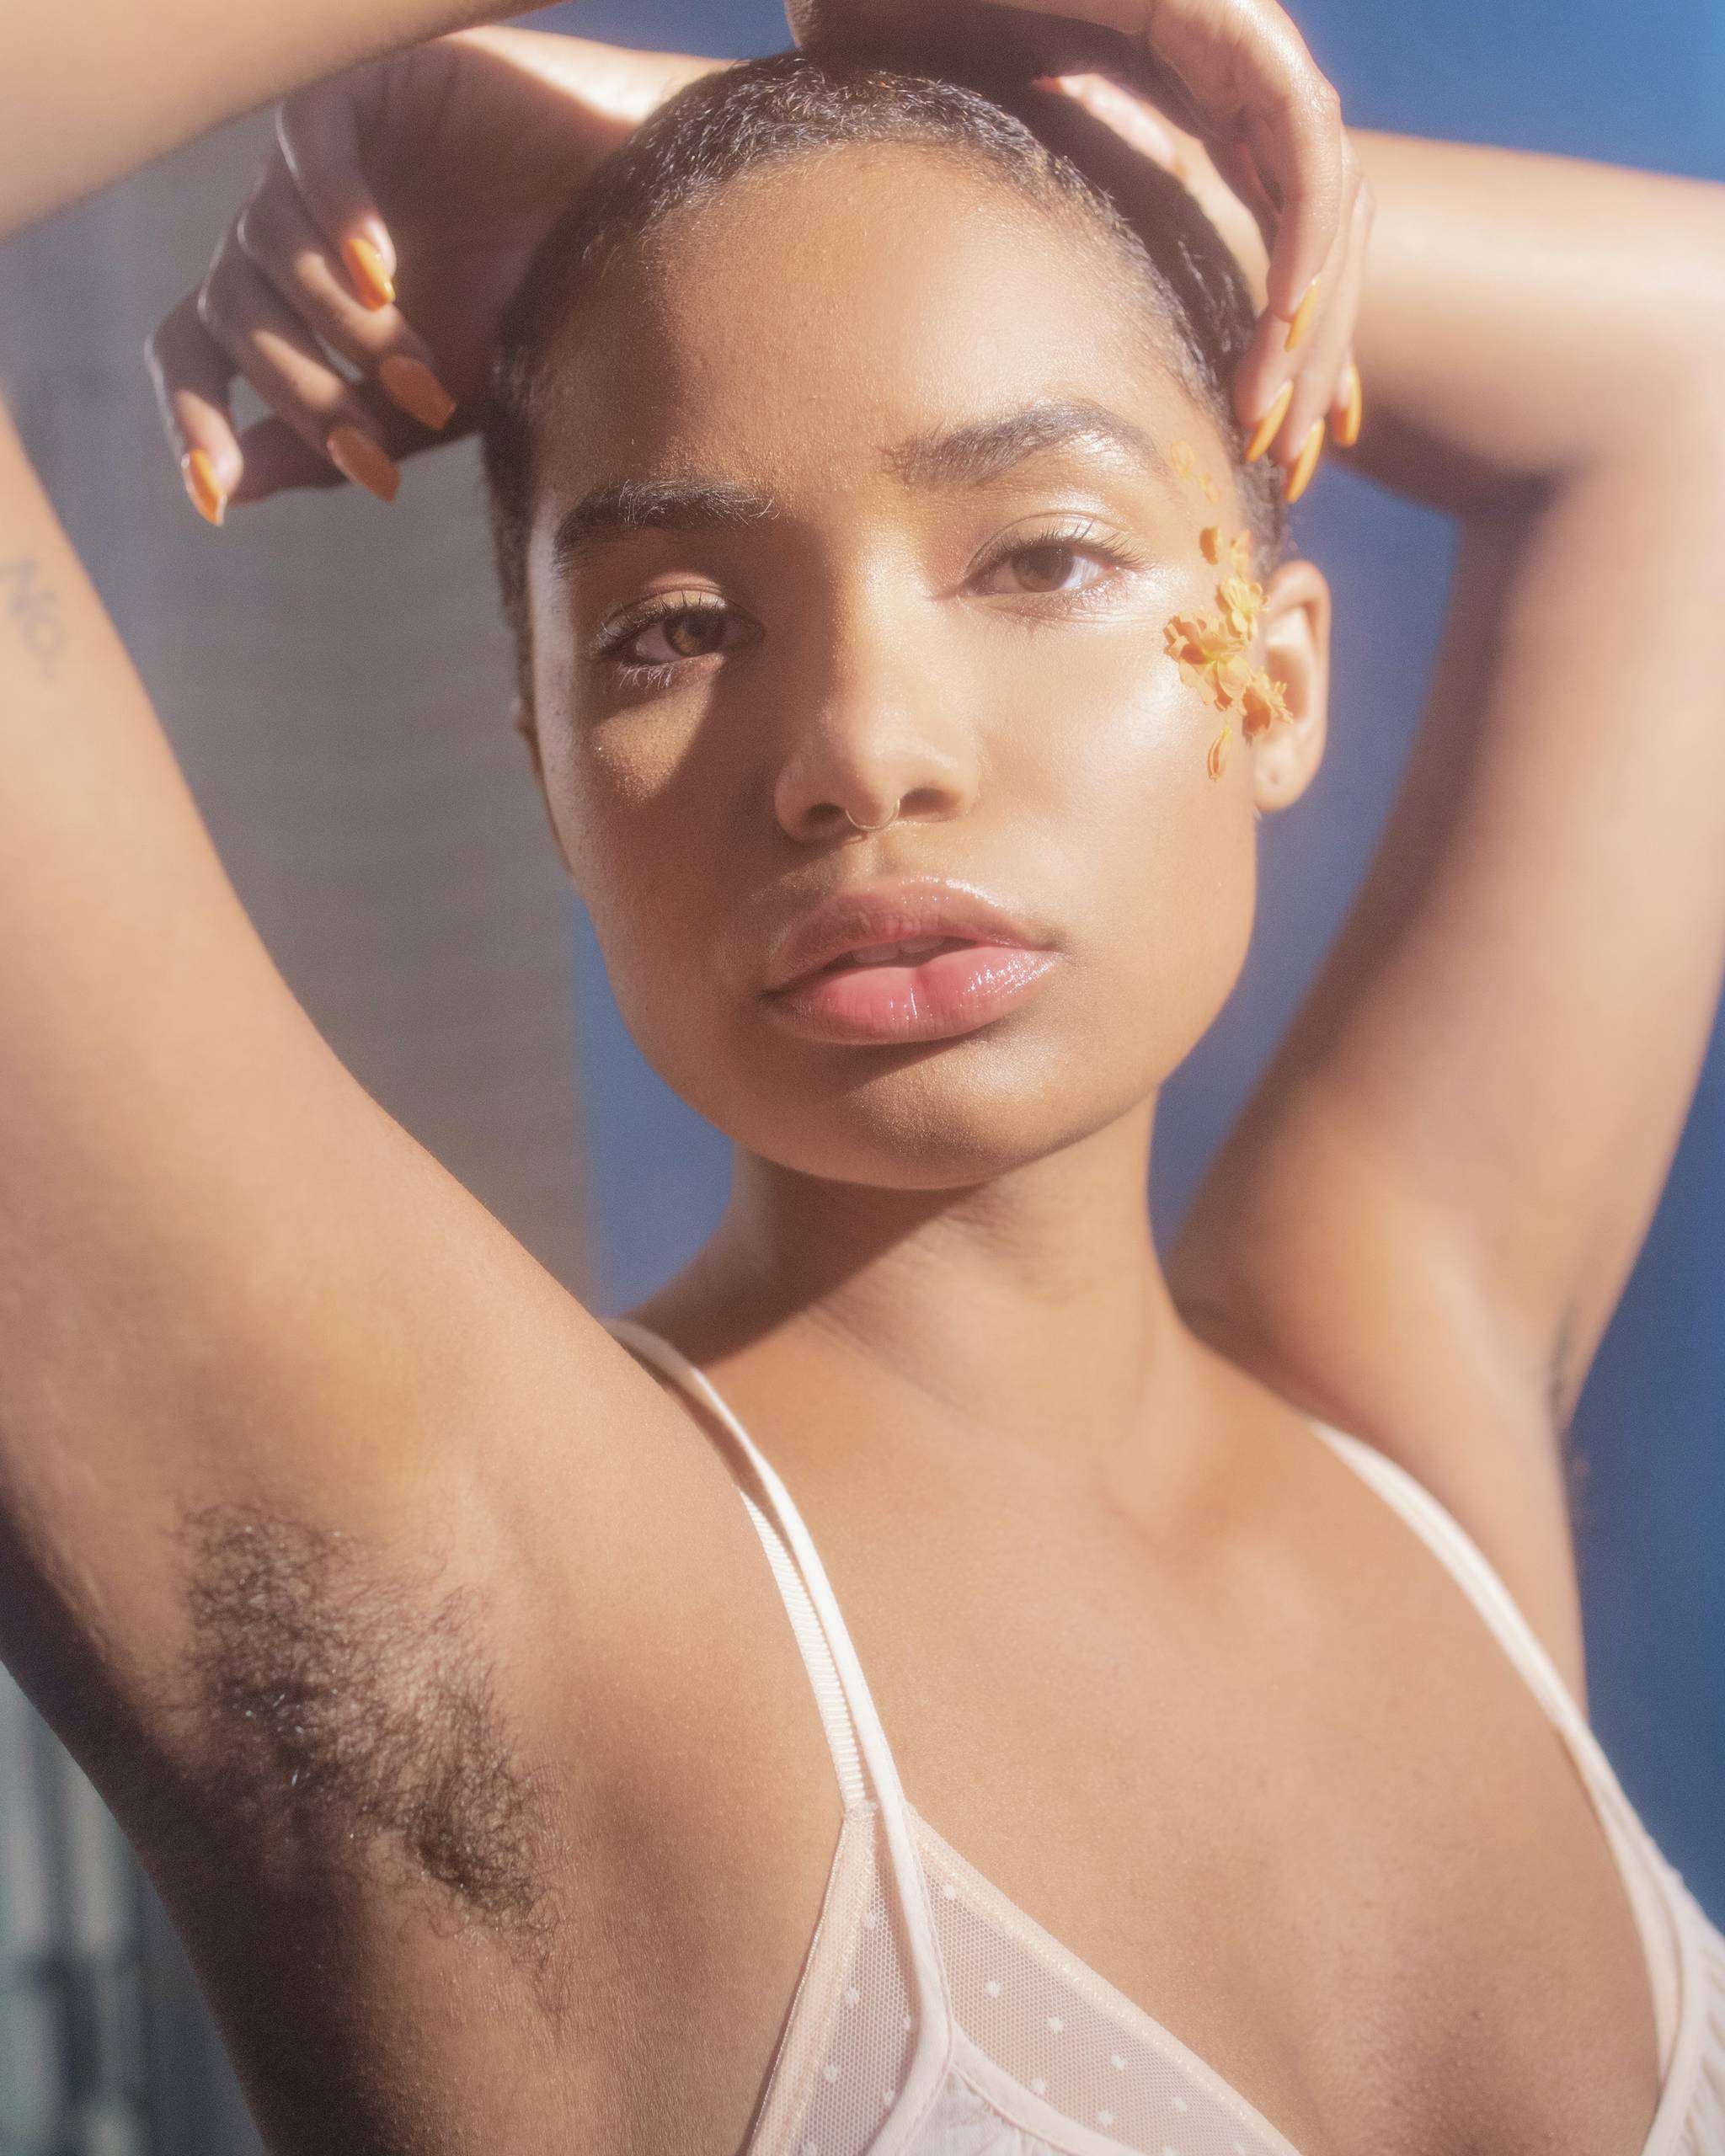 Dove highlights underarm confidence during NYFW